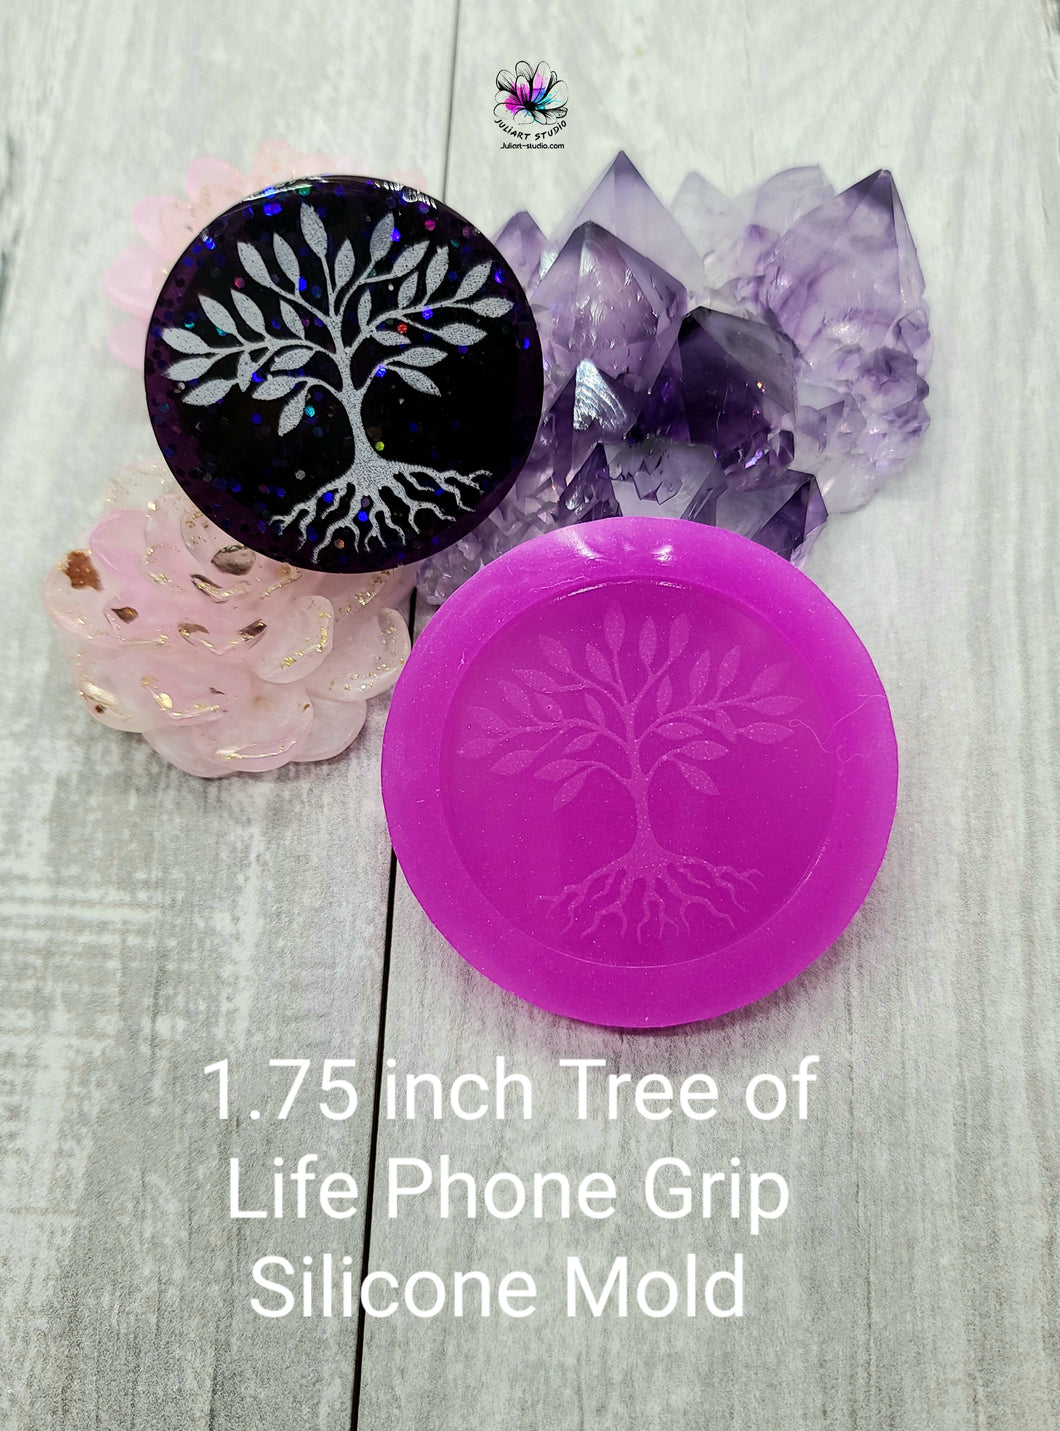 1.75 inch Tree Of Life Phone Grip Silicone Mold for Resin casting